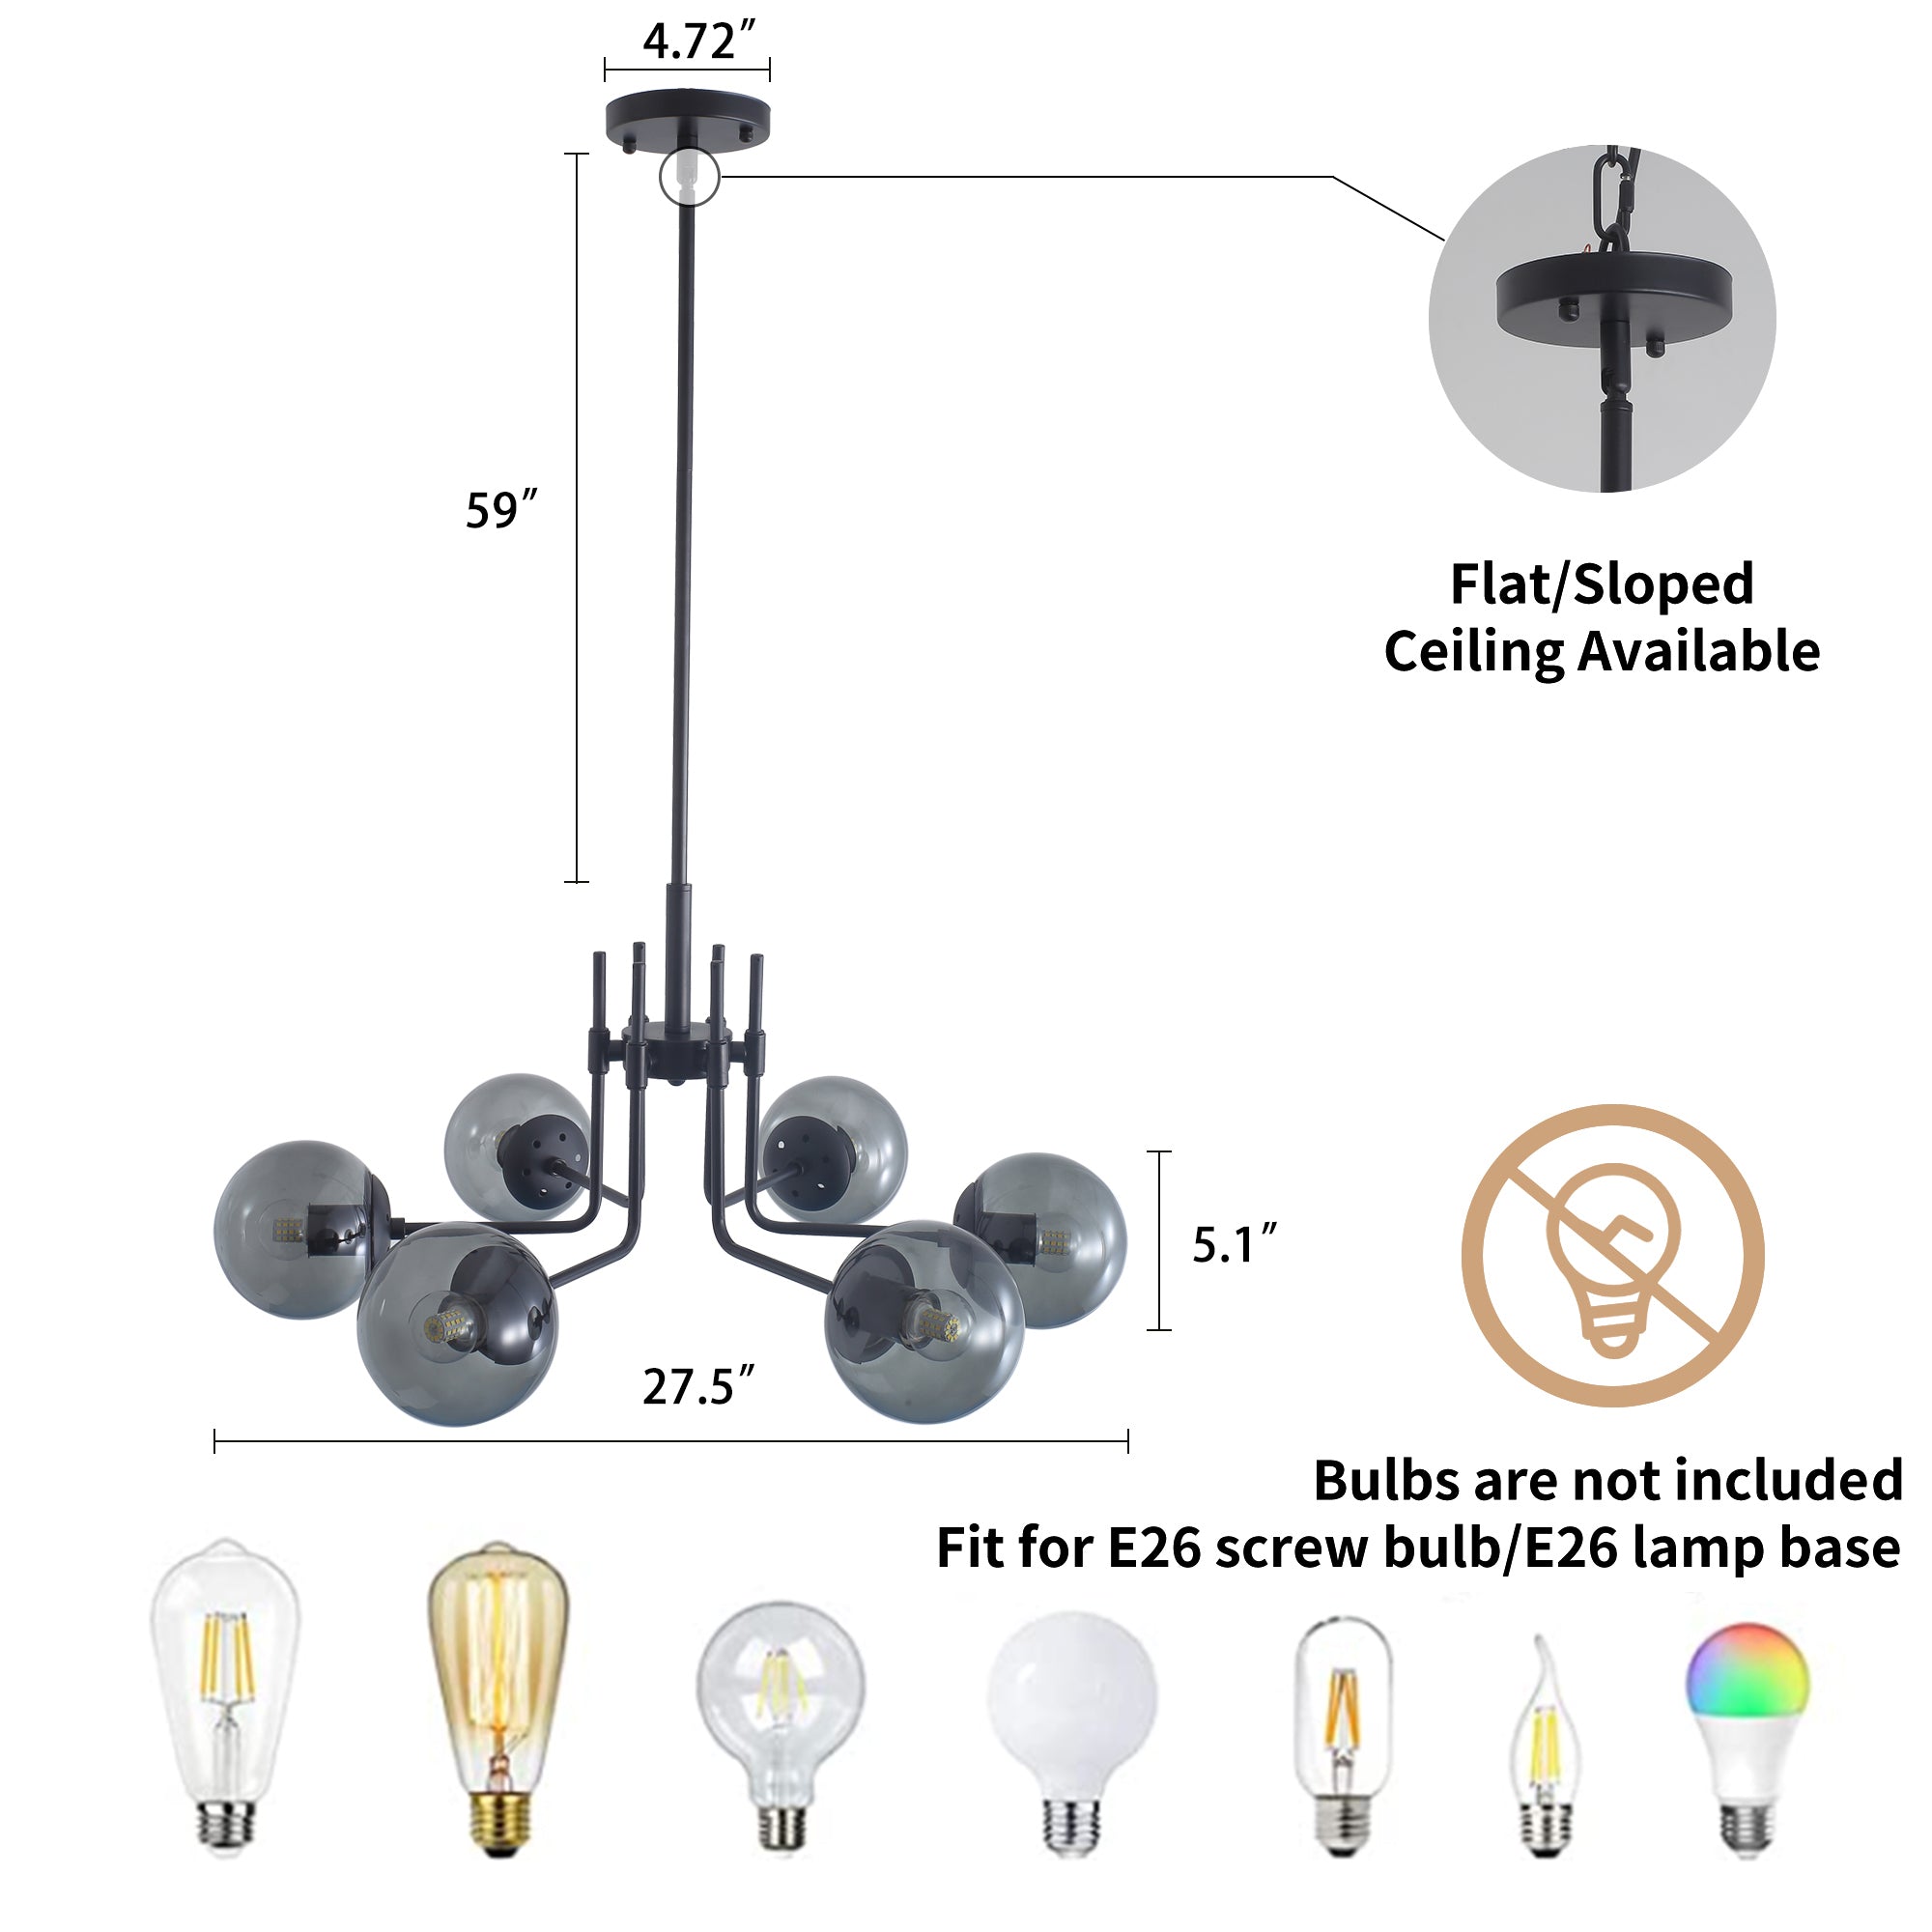 ZNTS Modern American style chandelier-black iron-glass lampshade -6 bulbs W116978777